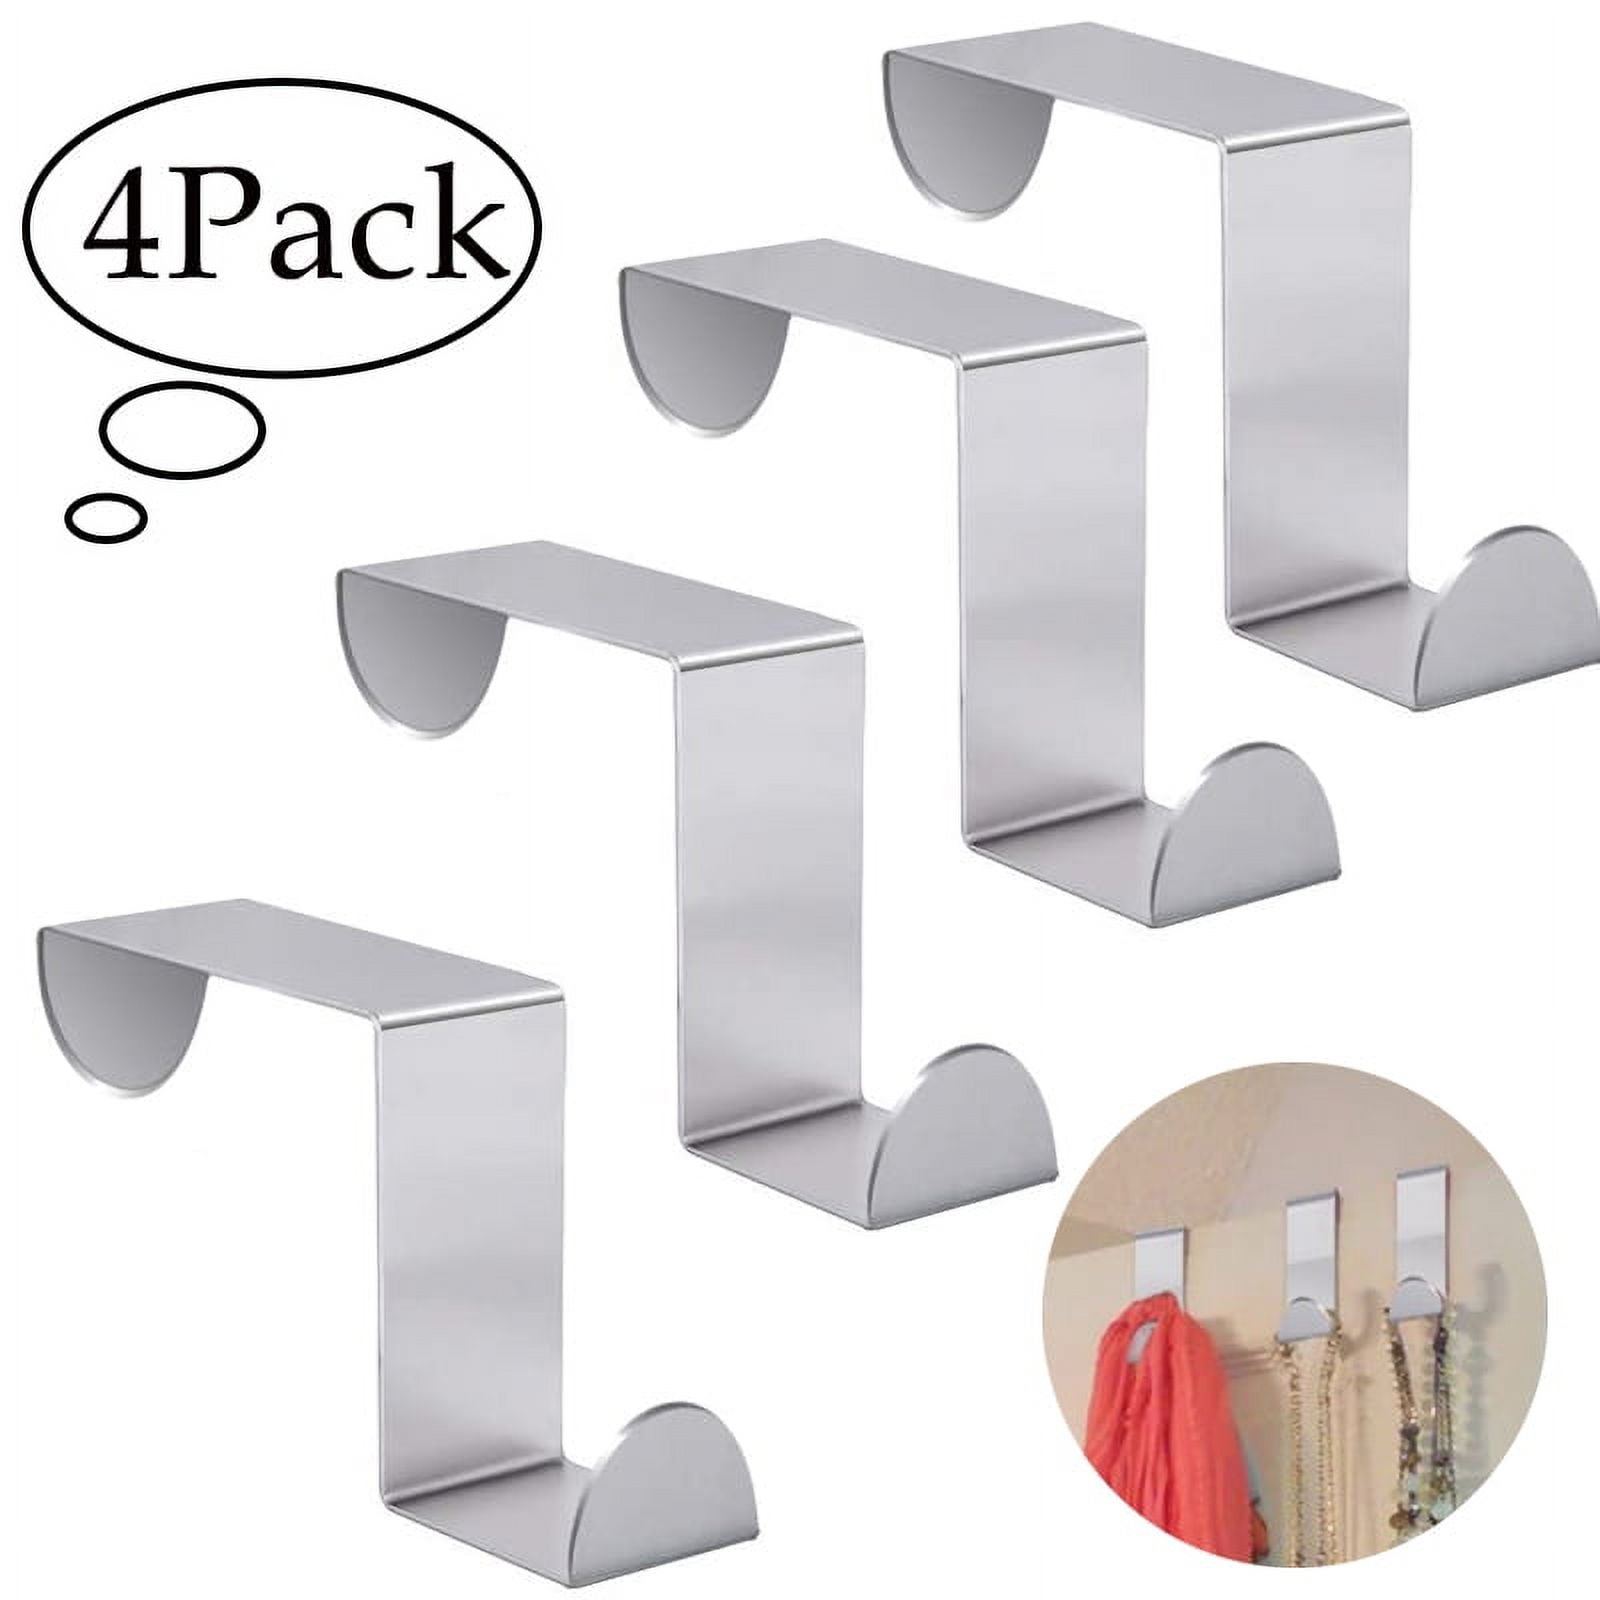 Lnkoo Over Door Hook - Double Side Wide or Narrow Gate, Hanged in The Back of Kitchen,Cabinet,Bathroom,Recycled Cubicle,Closet,Pantry,Laundry Room